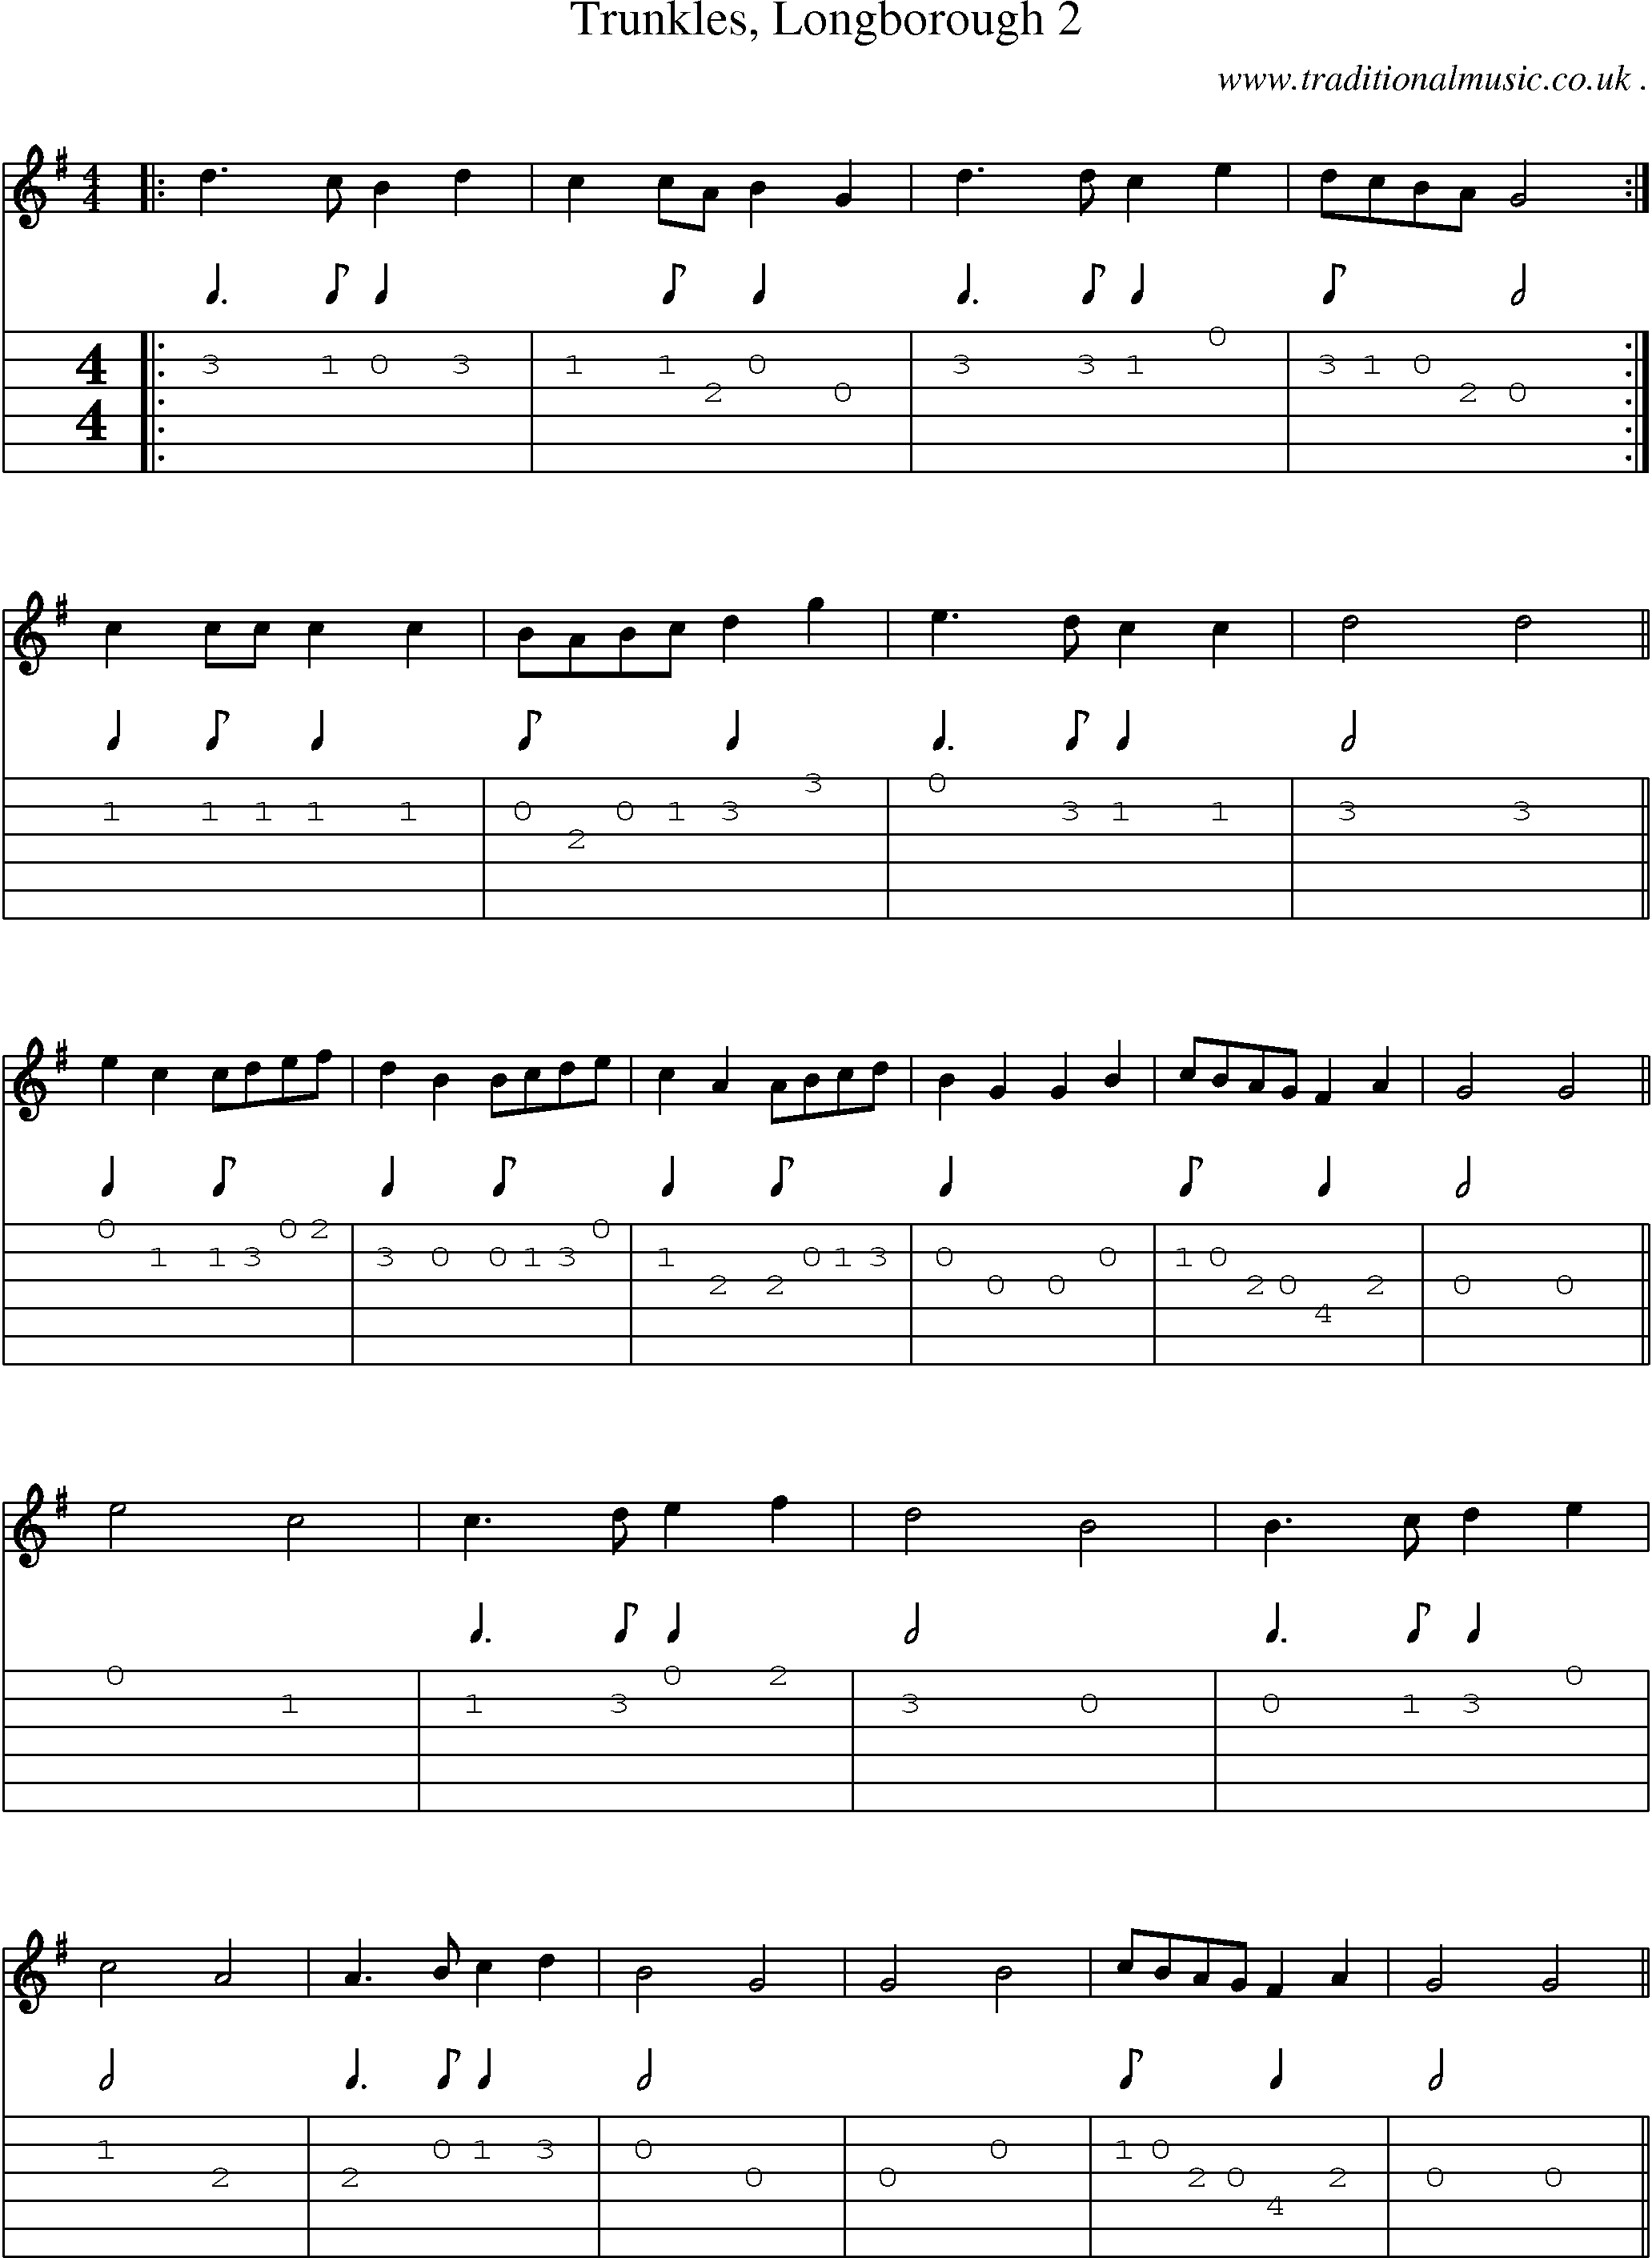 Sheet-Music and Guitar Tabs for Trunkles Longborough 2